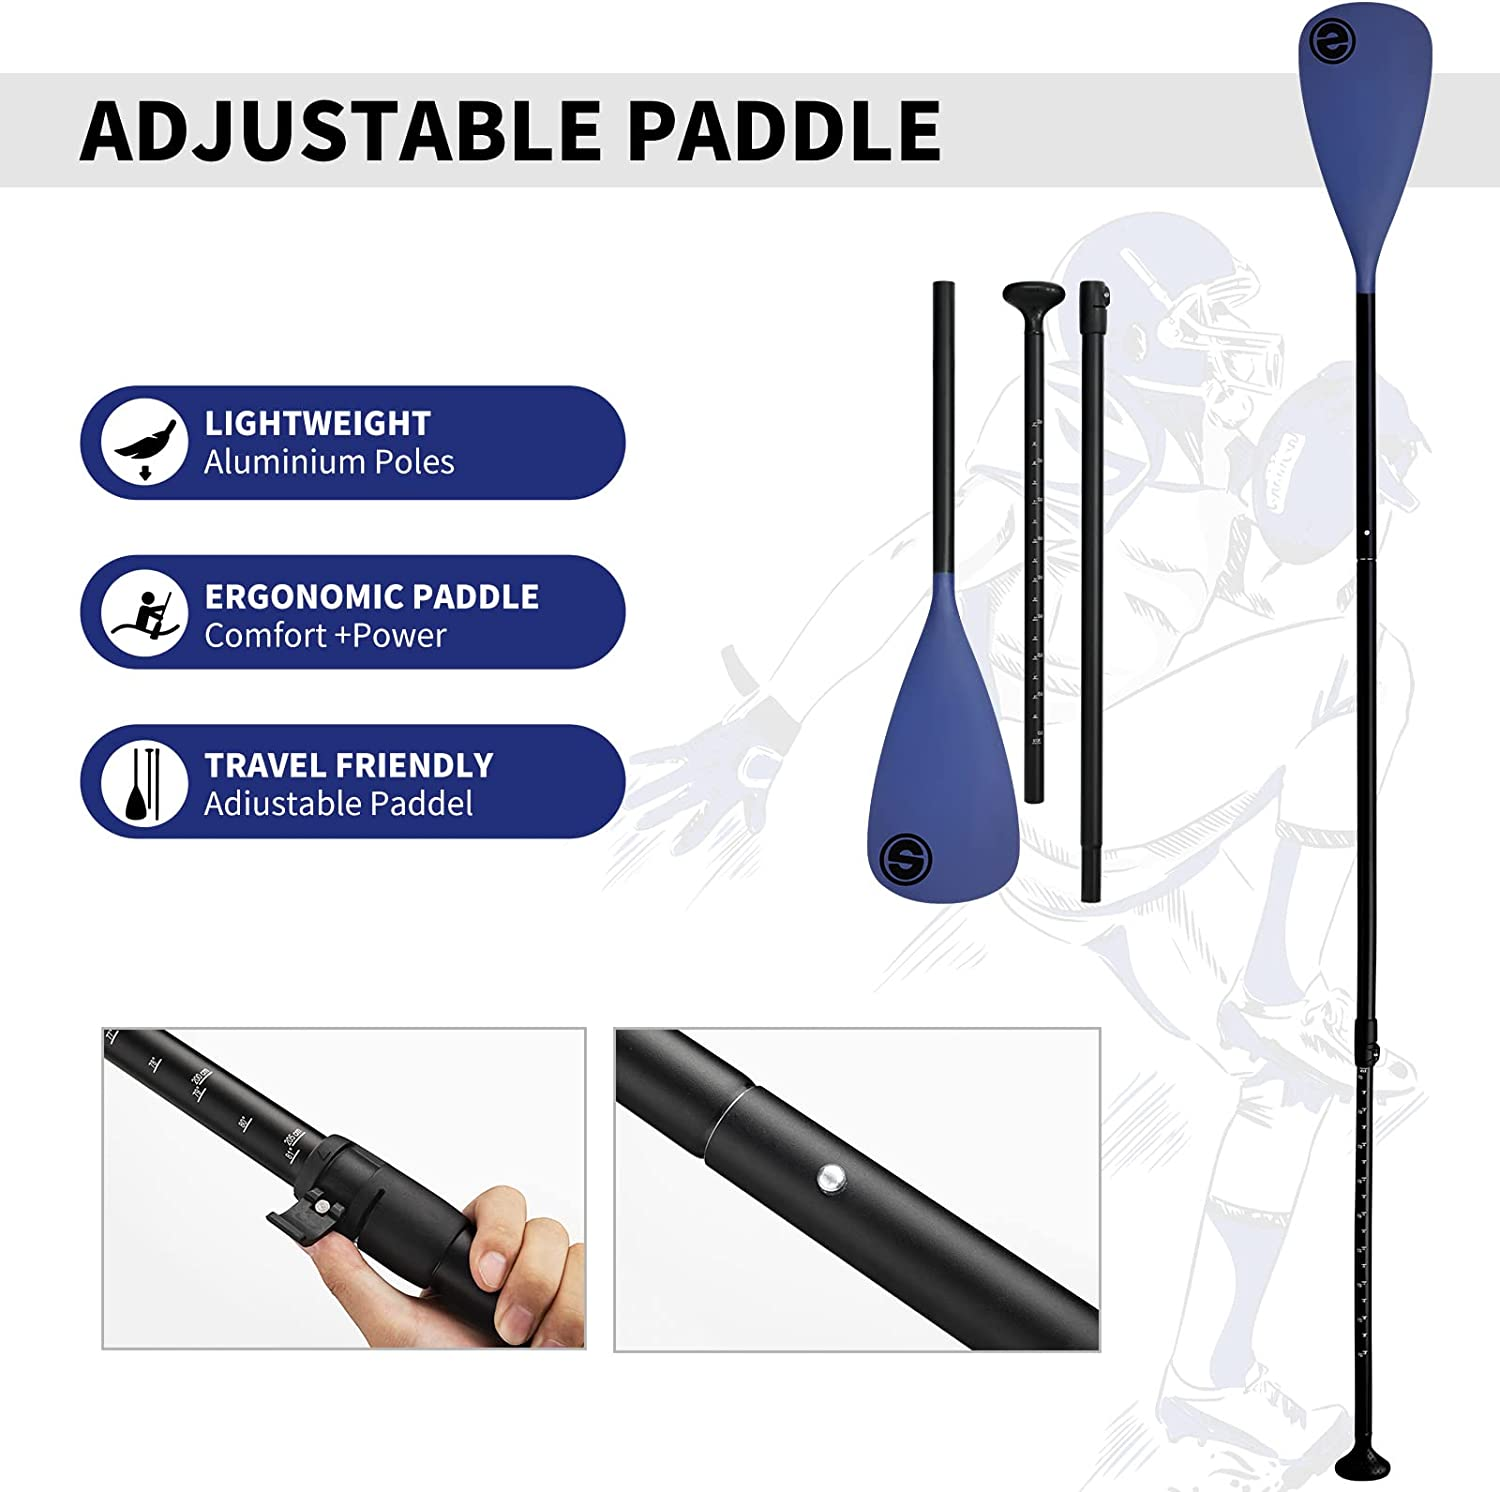 Inflatable Paddle Board; 10'6"x32"x6";  SEASEESUP Paddle Boards for Adults; Stand Up Paddle Board with All SUP Accessories Paddleboard for Fishing Yoga Kayaking Surf - SportsGO